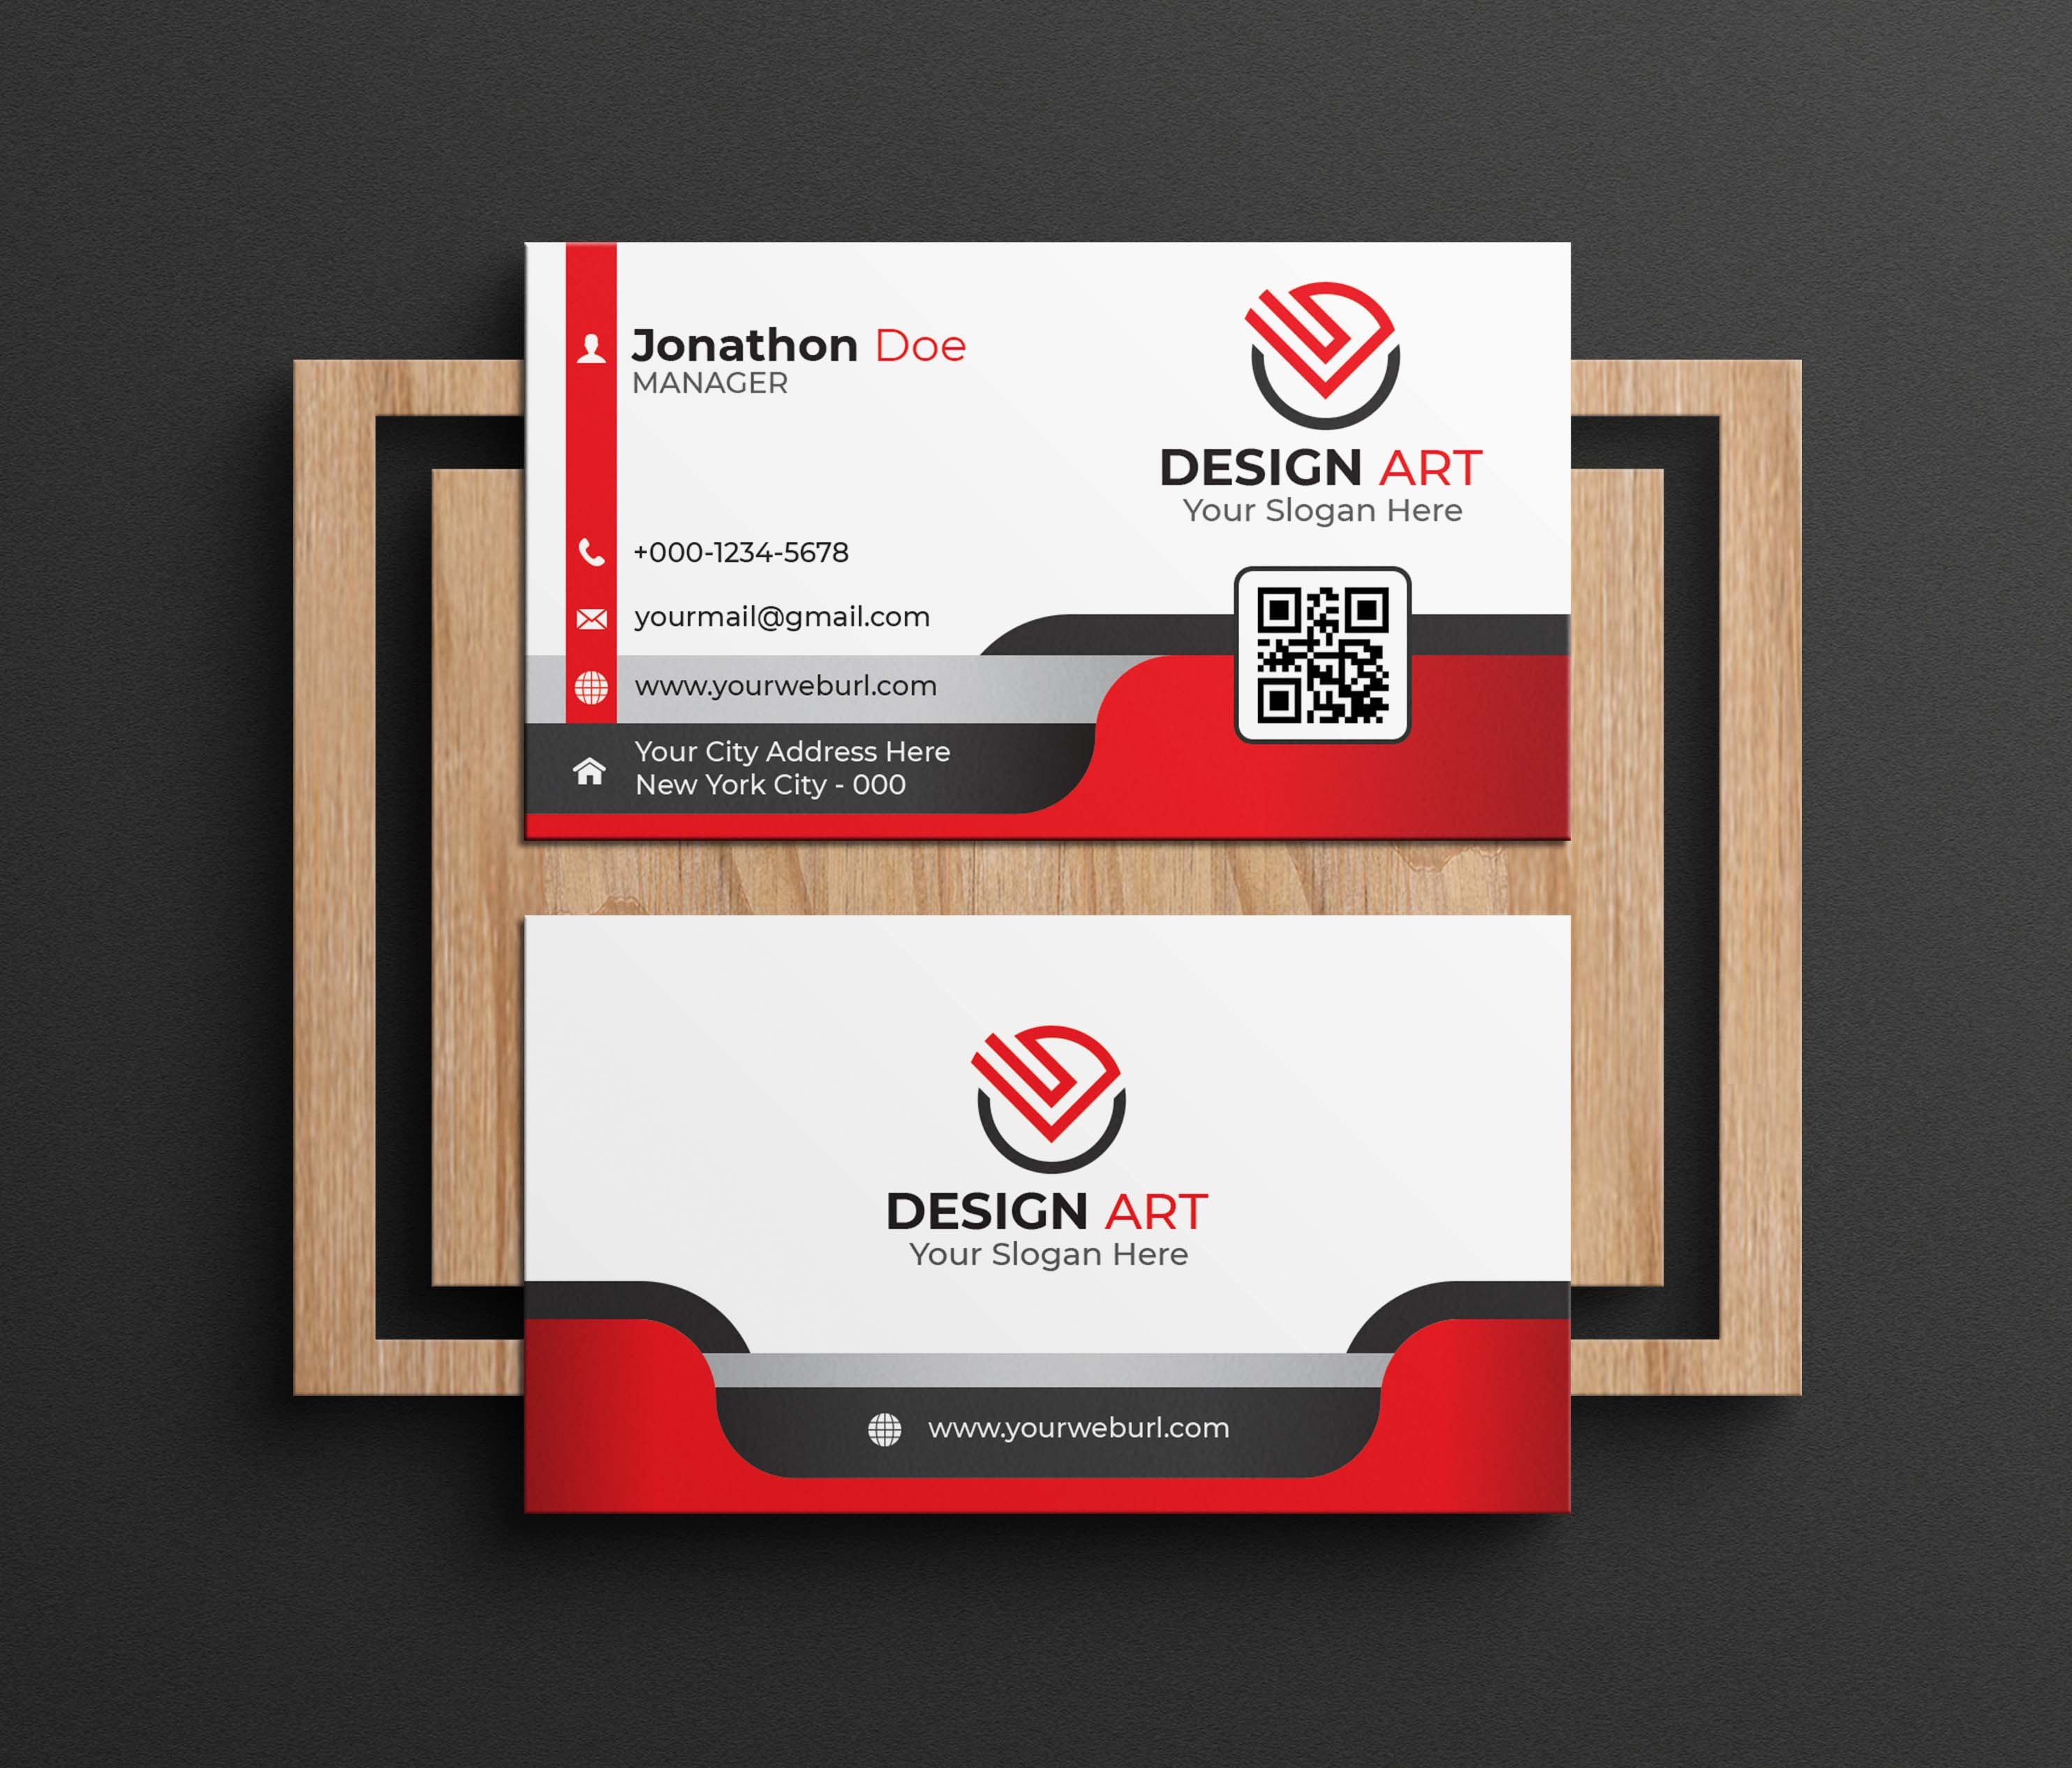 Business card with a red and black design art logo.